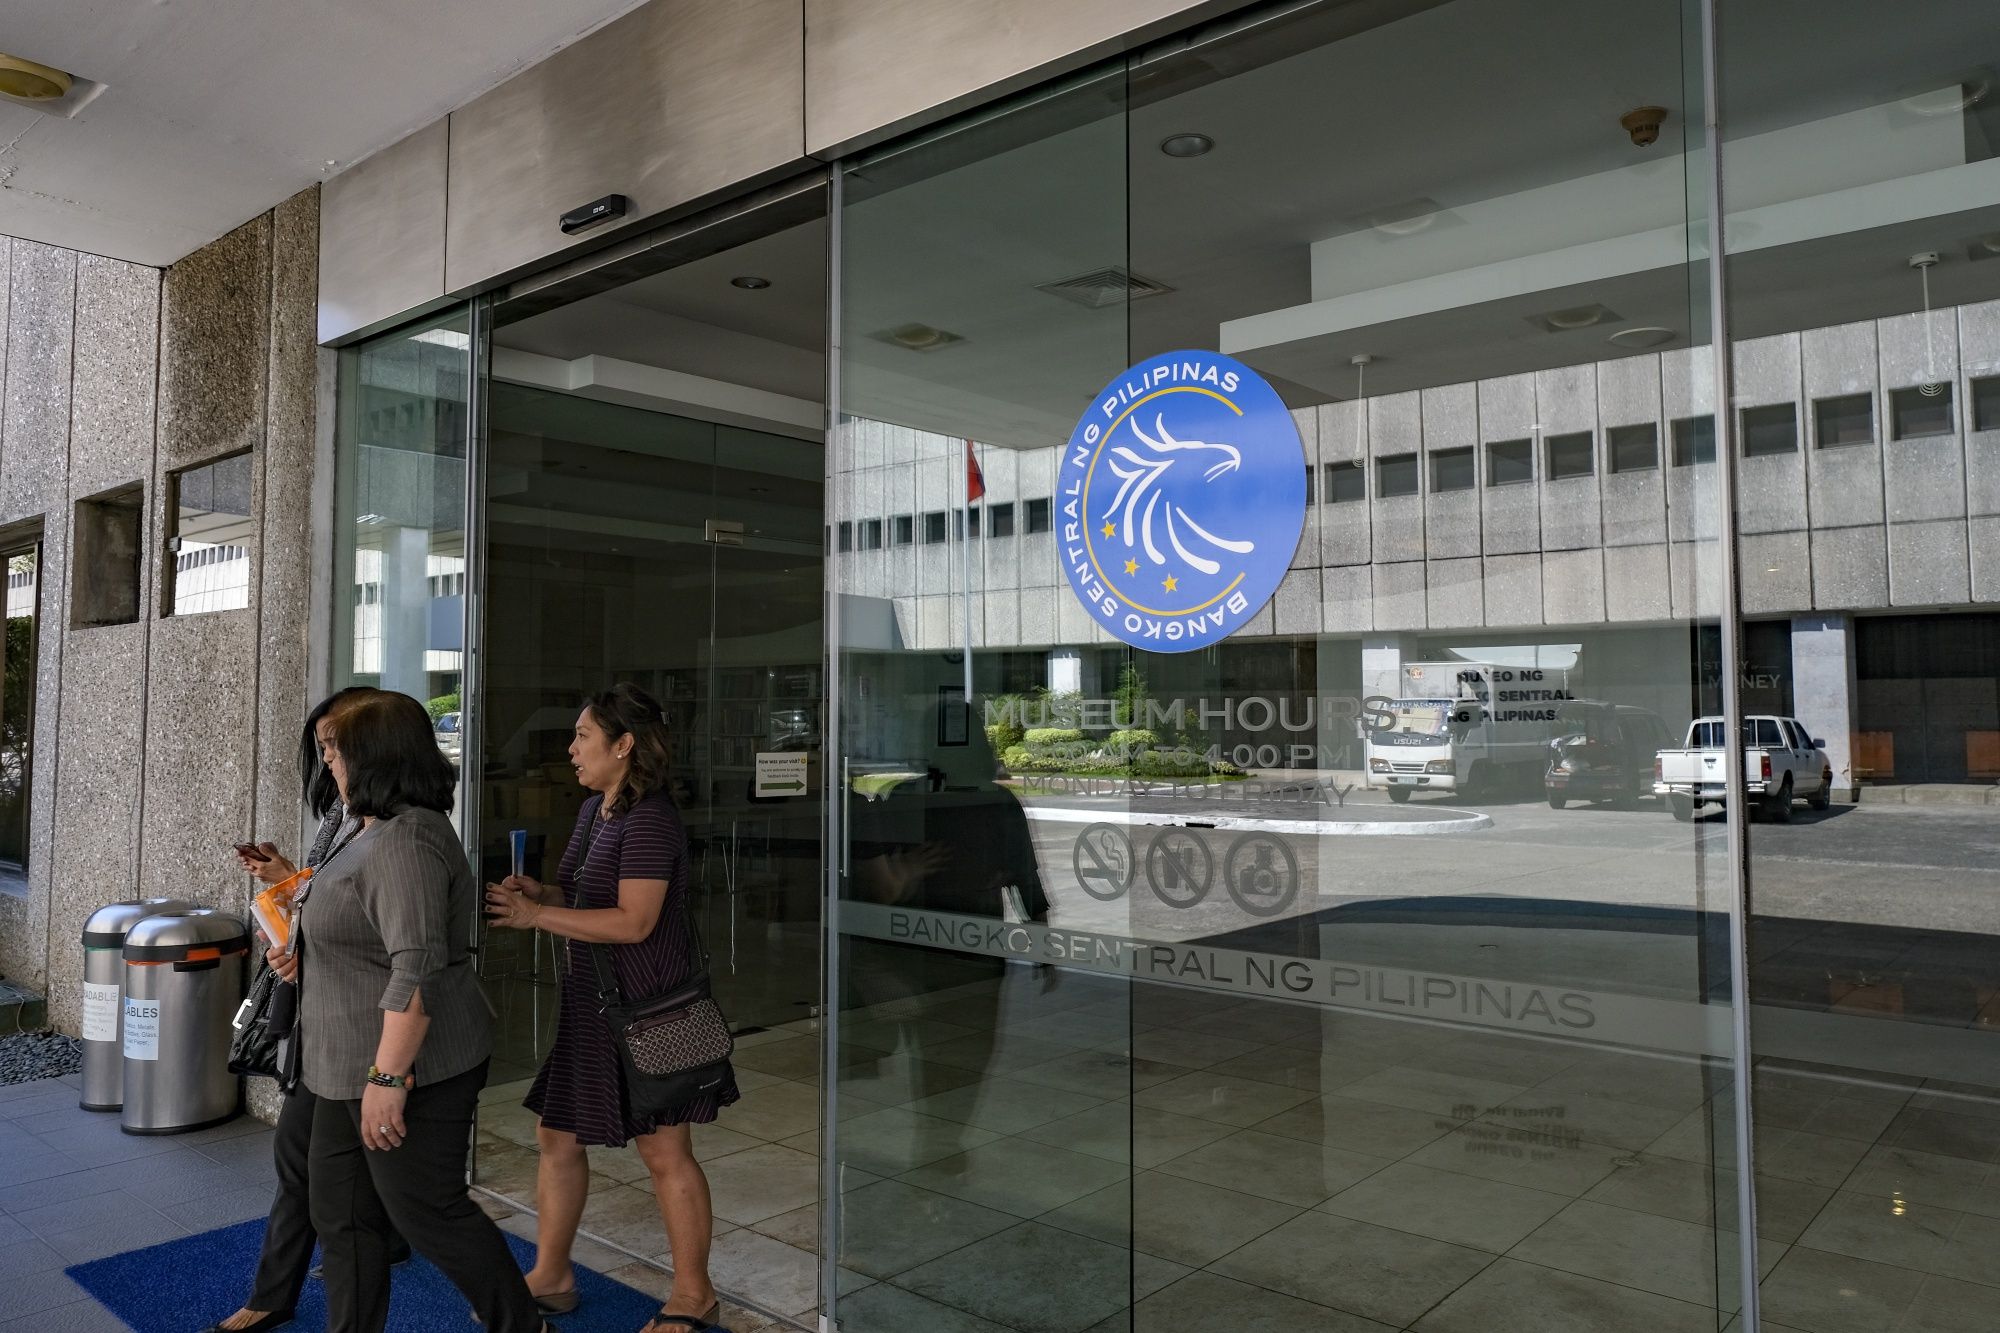 People exit the Bangko Sentral ng Pilipinas headquarters in Manila, the Philippines, on Thursday, Feb. 7, 2019. The Philippines central bank left its benchmark interest rate unchanged for a second straight policy meeting, while cutting inflation forecasts for this year and next. Photographer: Veejay Villafranca/Bloomberg